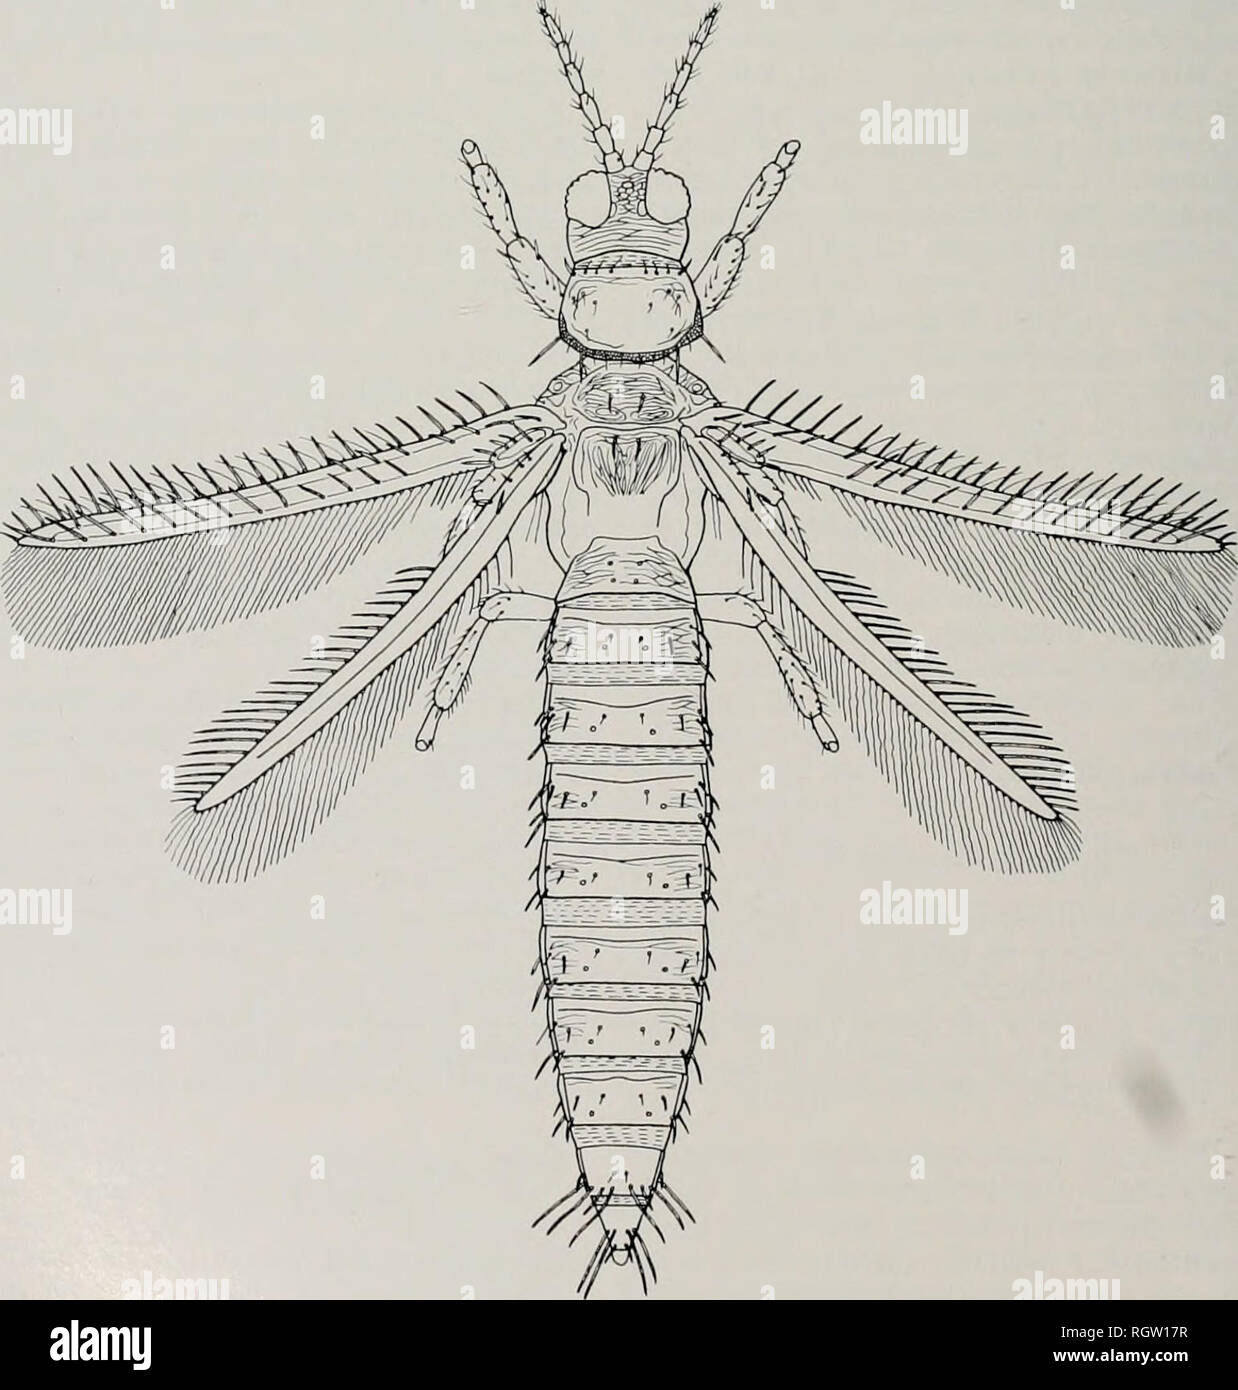 . Bulletin. Natural history; Natural history. 372 Illinois Natiirai. IlIST(lR^â SrRKv Iiui.ietin Vol. 29. Art. 4 Type-locality.âDenmark or Nor- way. Synonymized by Priesner (1925c). Thrips Havicornis Reuter, 0. M. (1878- 79:2i9). ? 9. Type-locality.âPar- gas (Parainen), Turku-Pori, Fin- land. Synonvmized bv Reuter (1899). Female (macropterous) (Fig. 140). âLength distended about 1.7 mm. General color dark brown. Antennal segments III-VII largely yellow, apex of segments IV-VI and all of VII brown. Fore tibiae, except at sides, and all tarsi yellow to yellow-brown. Fore wings nearly uniformly  Stock Photo